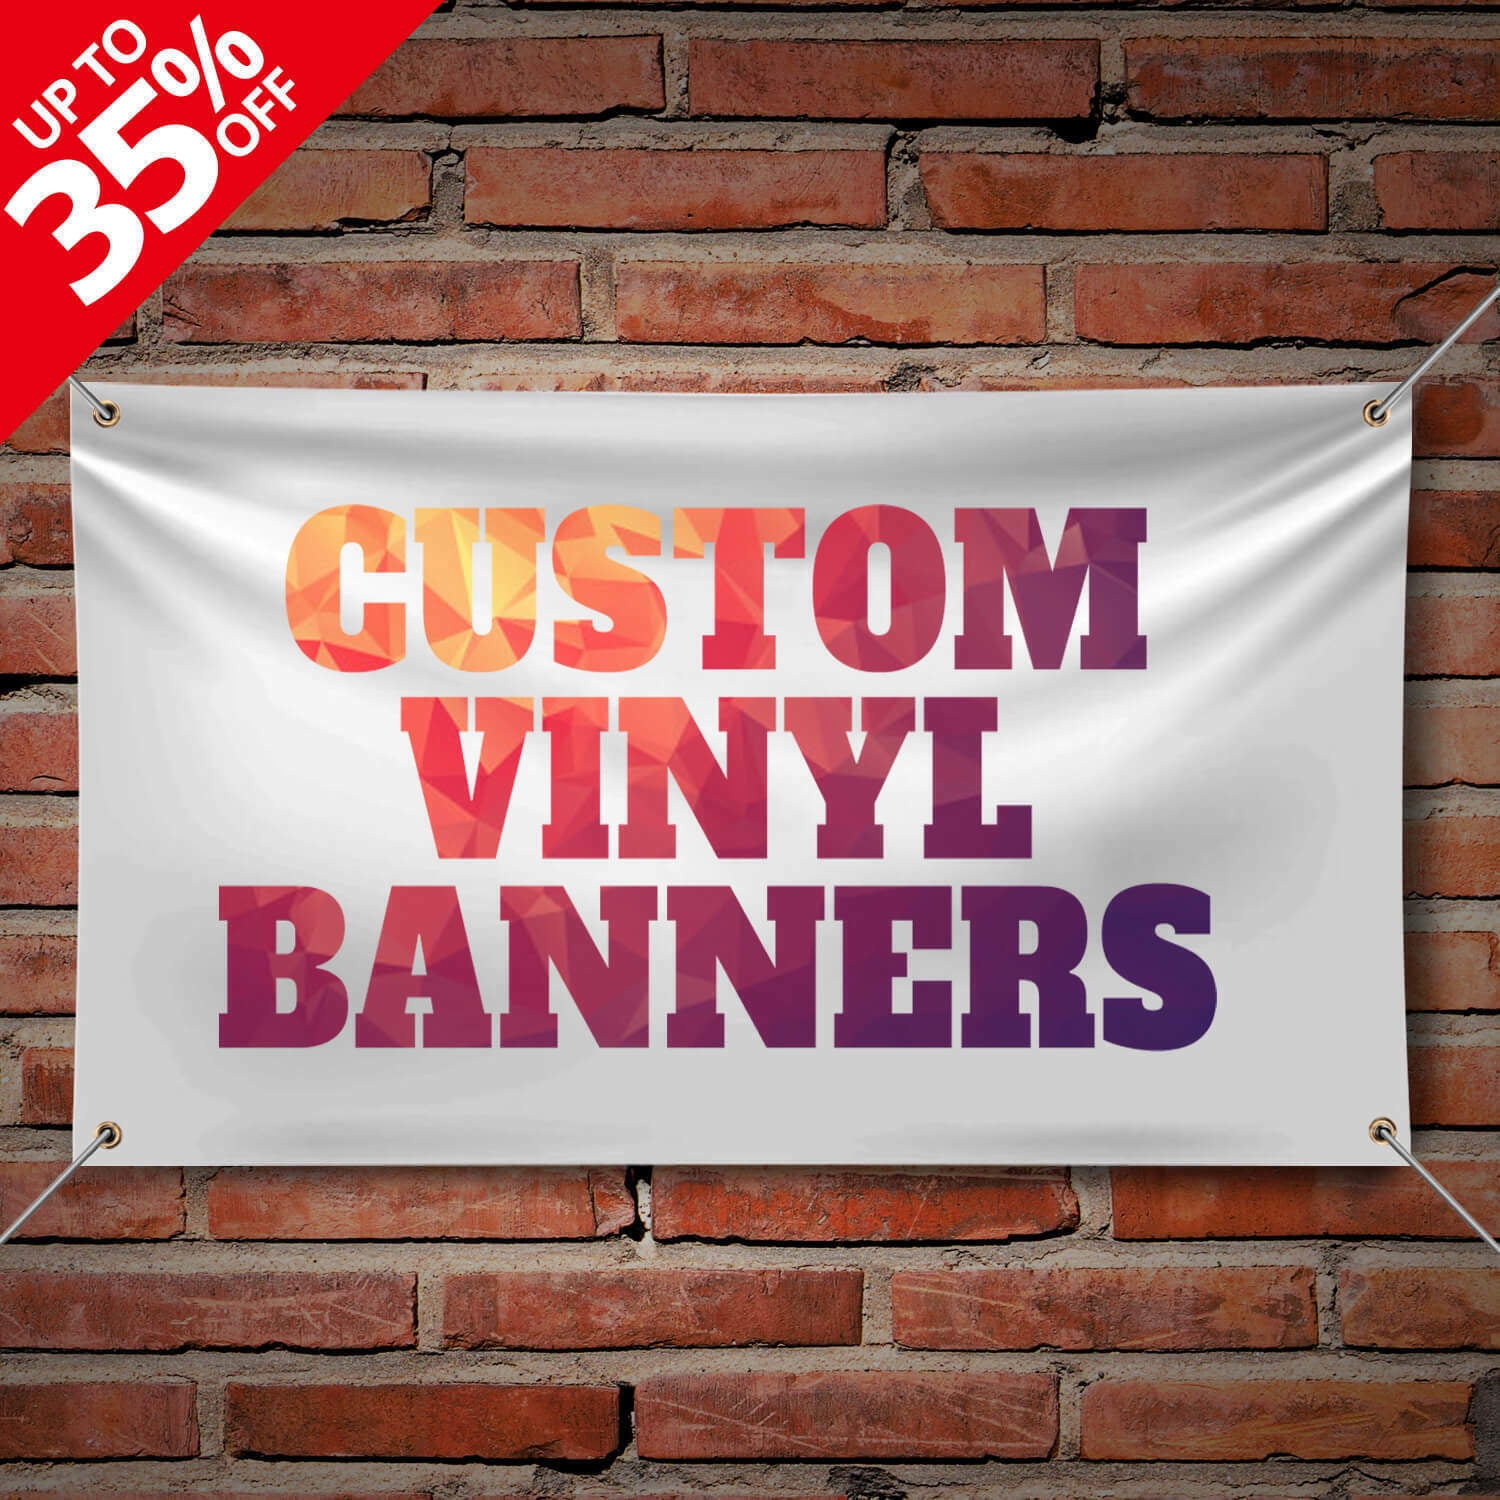 WE SELL TIRES WHEELS Advertising Vinyl Banner Flag Sign LARGE HUGE XXL SIZE USA 